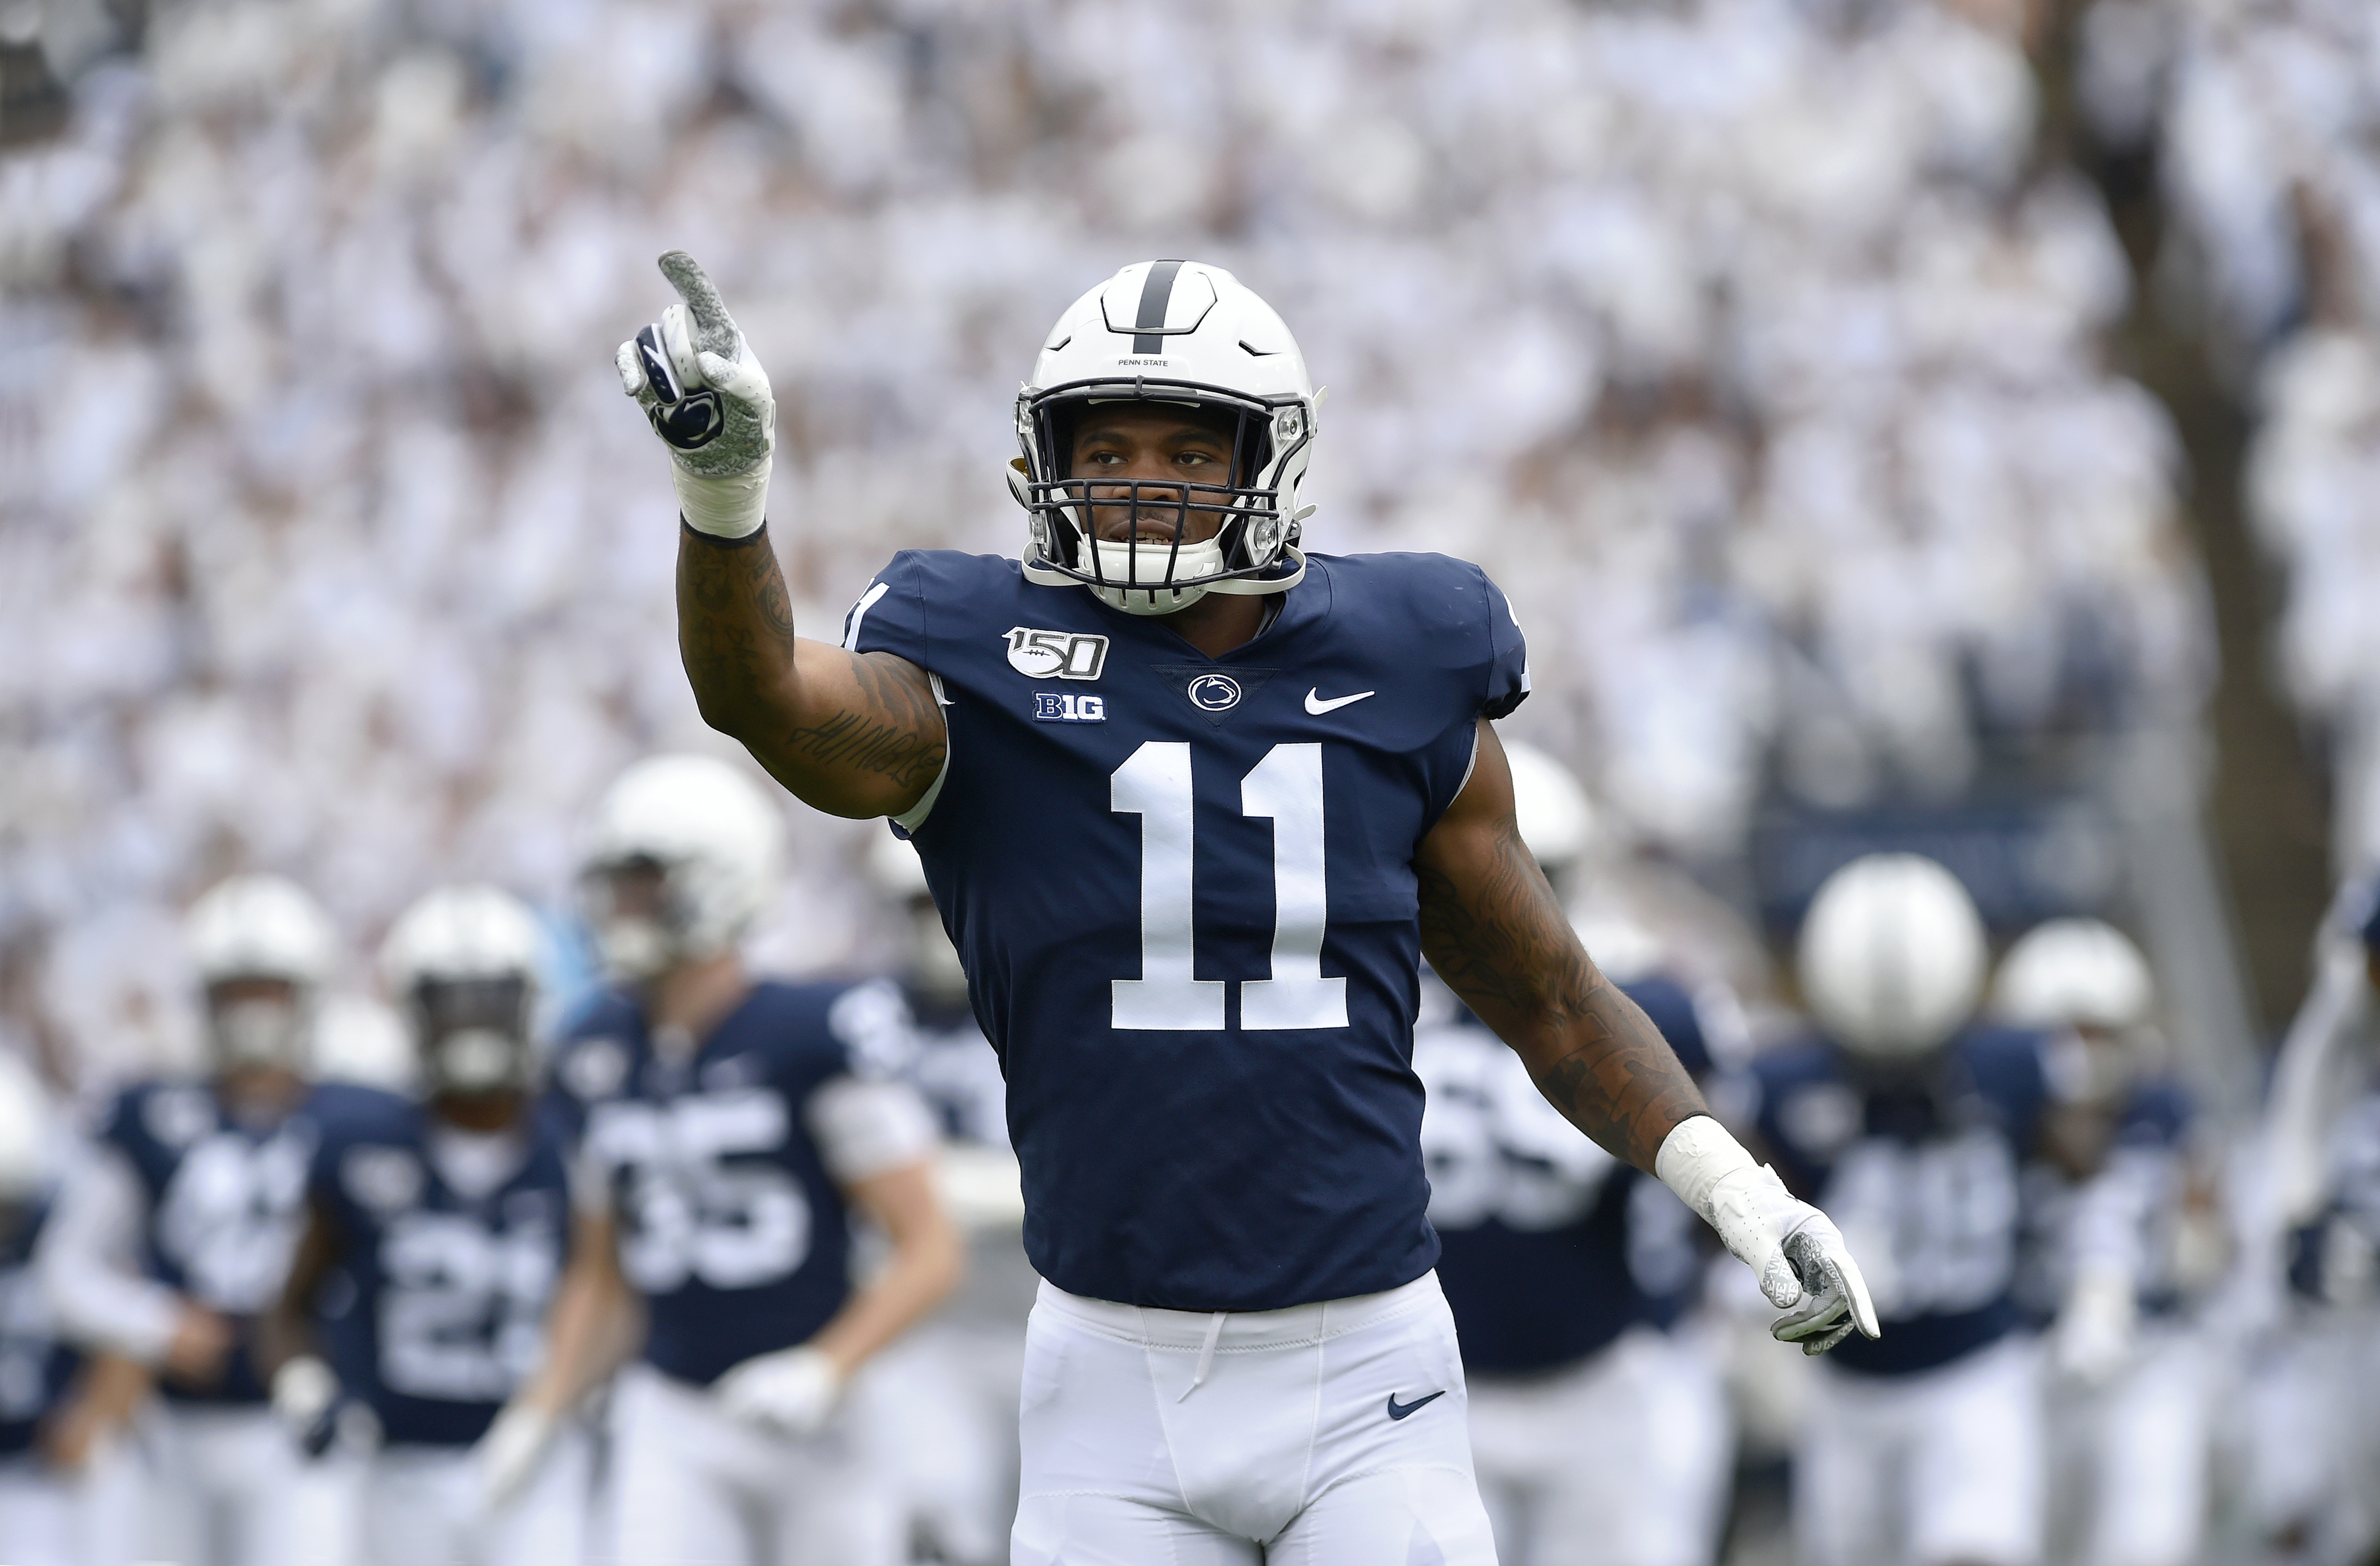 NFL Prospect Micah Parsons On His Mindset Before The Draft, How He Got The  Nickname 'The Waterboy', And How He Plans To Spend His First NFL Paycheck -  BroBible